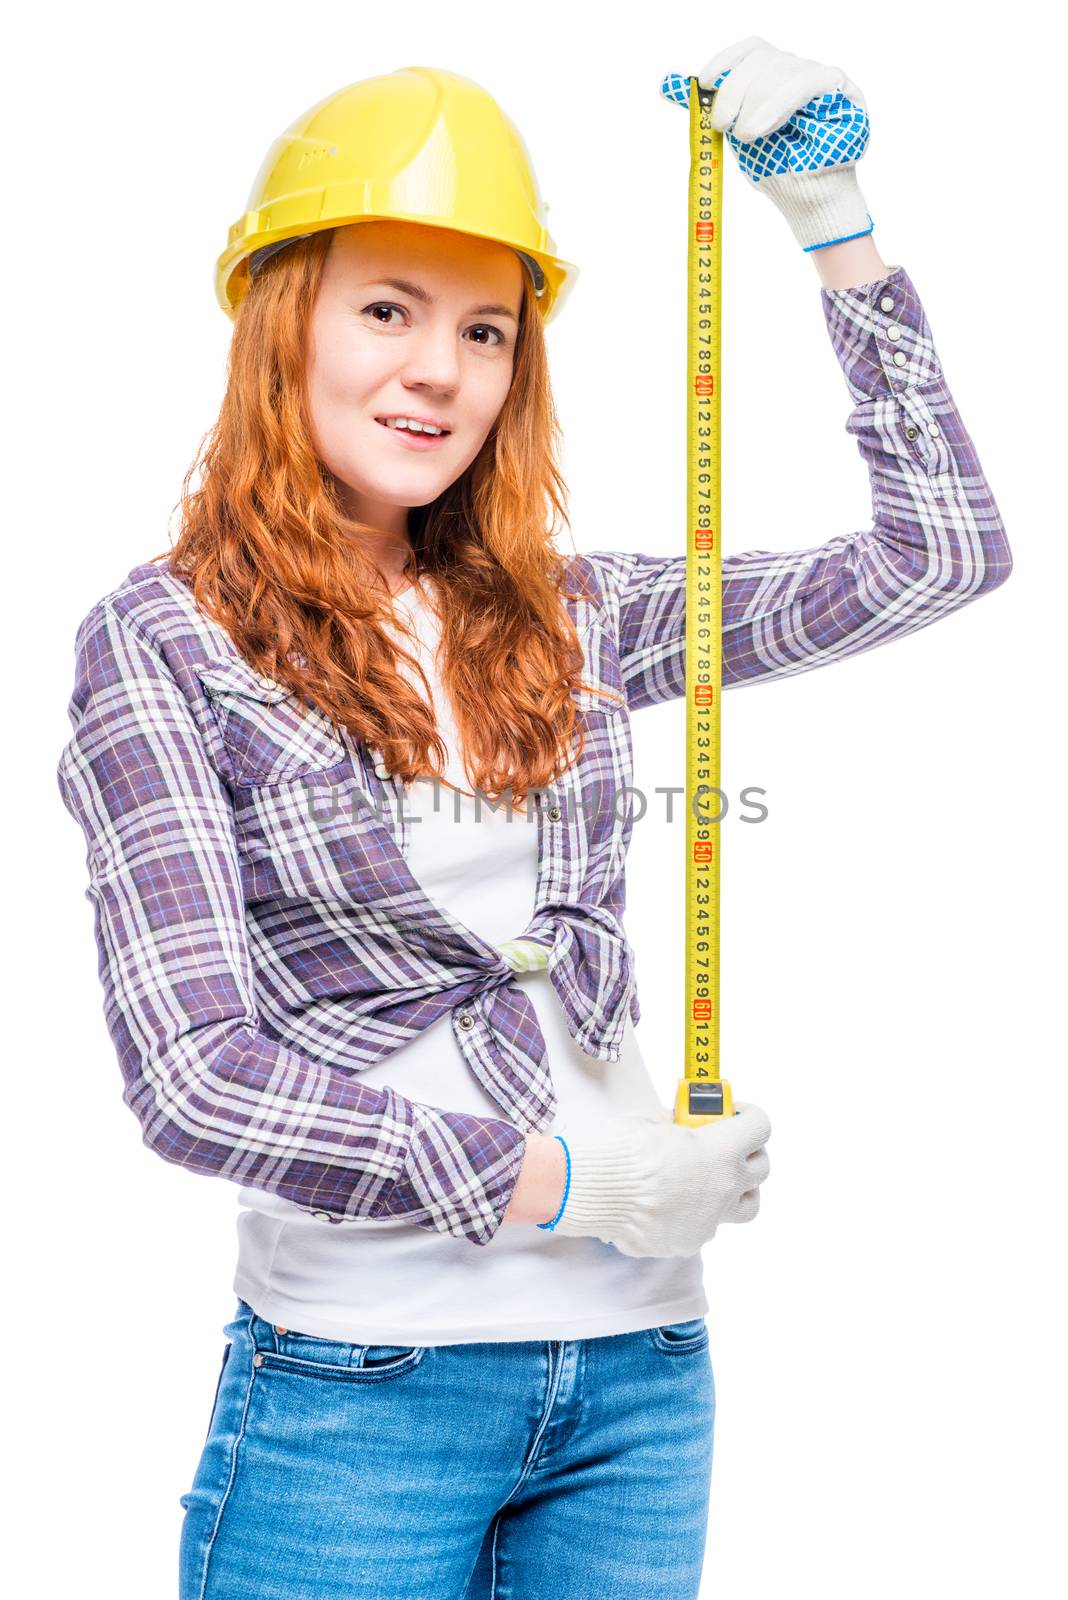 carpenter's male profession, woman with a tape measure on a white background